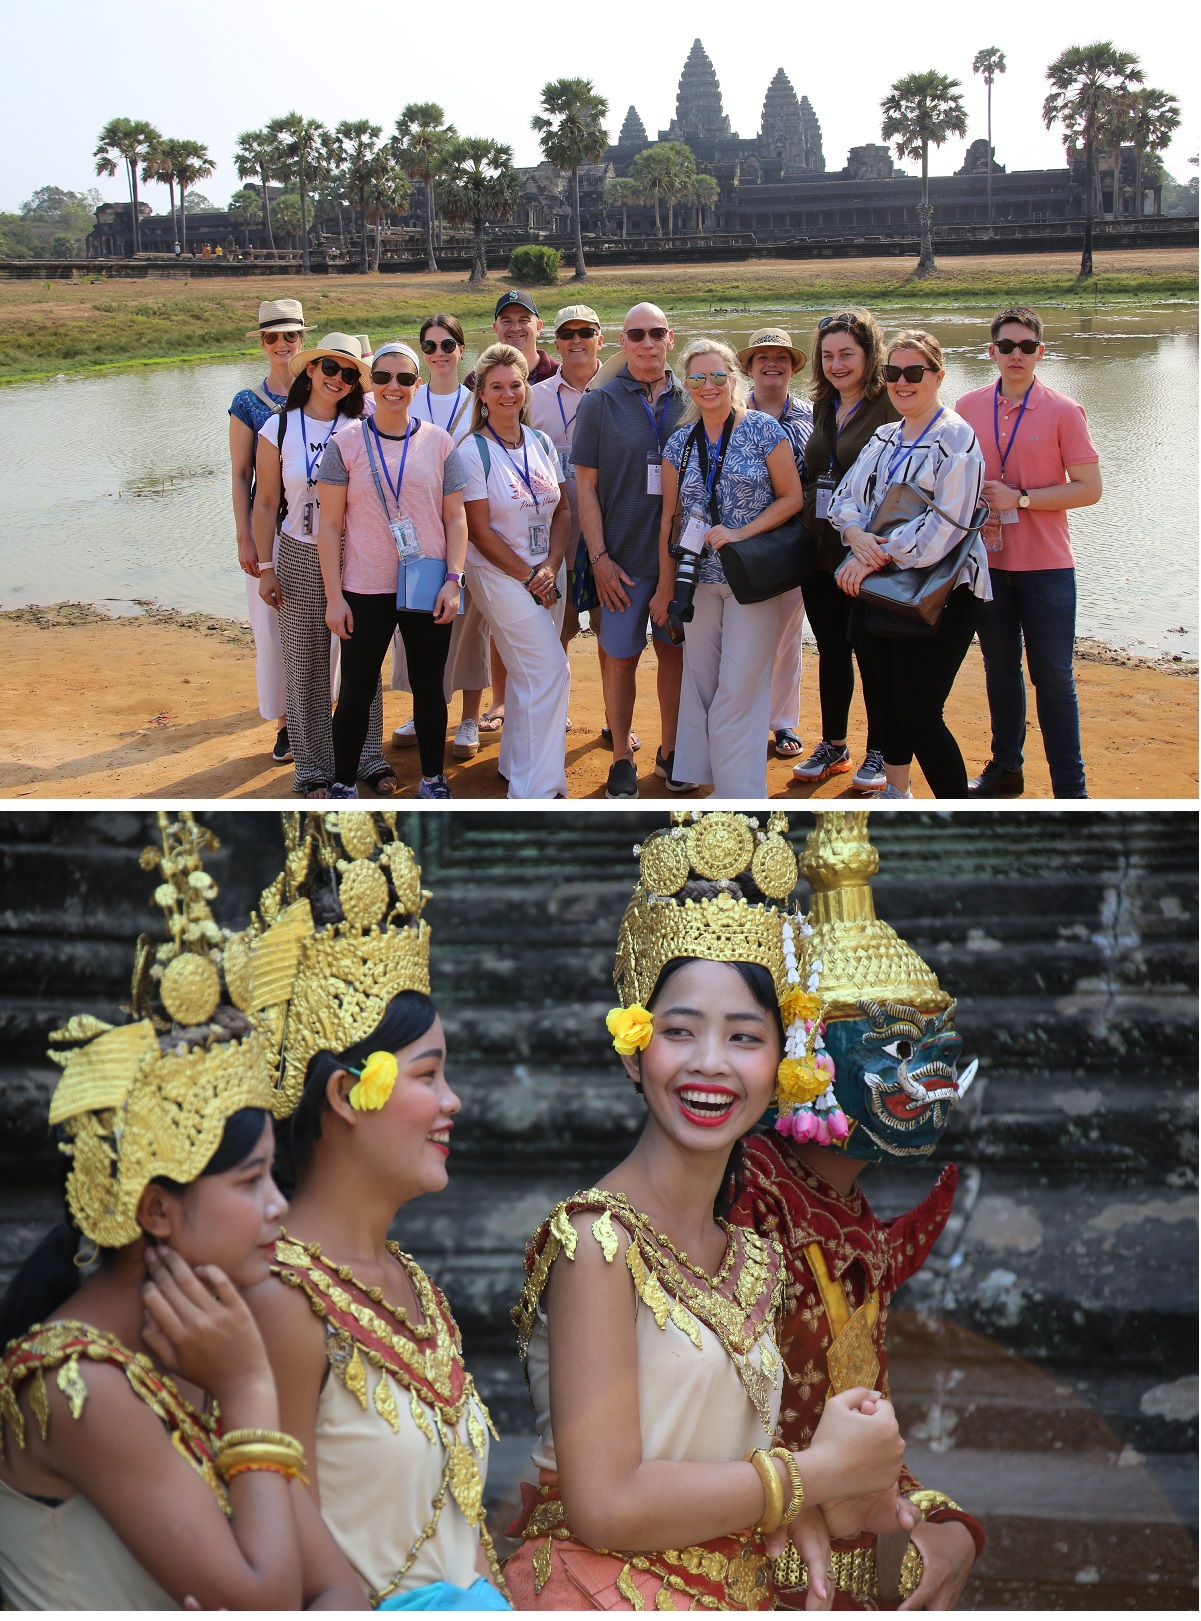 Delegates and Attractions at Angkor Wat temple